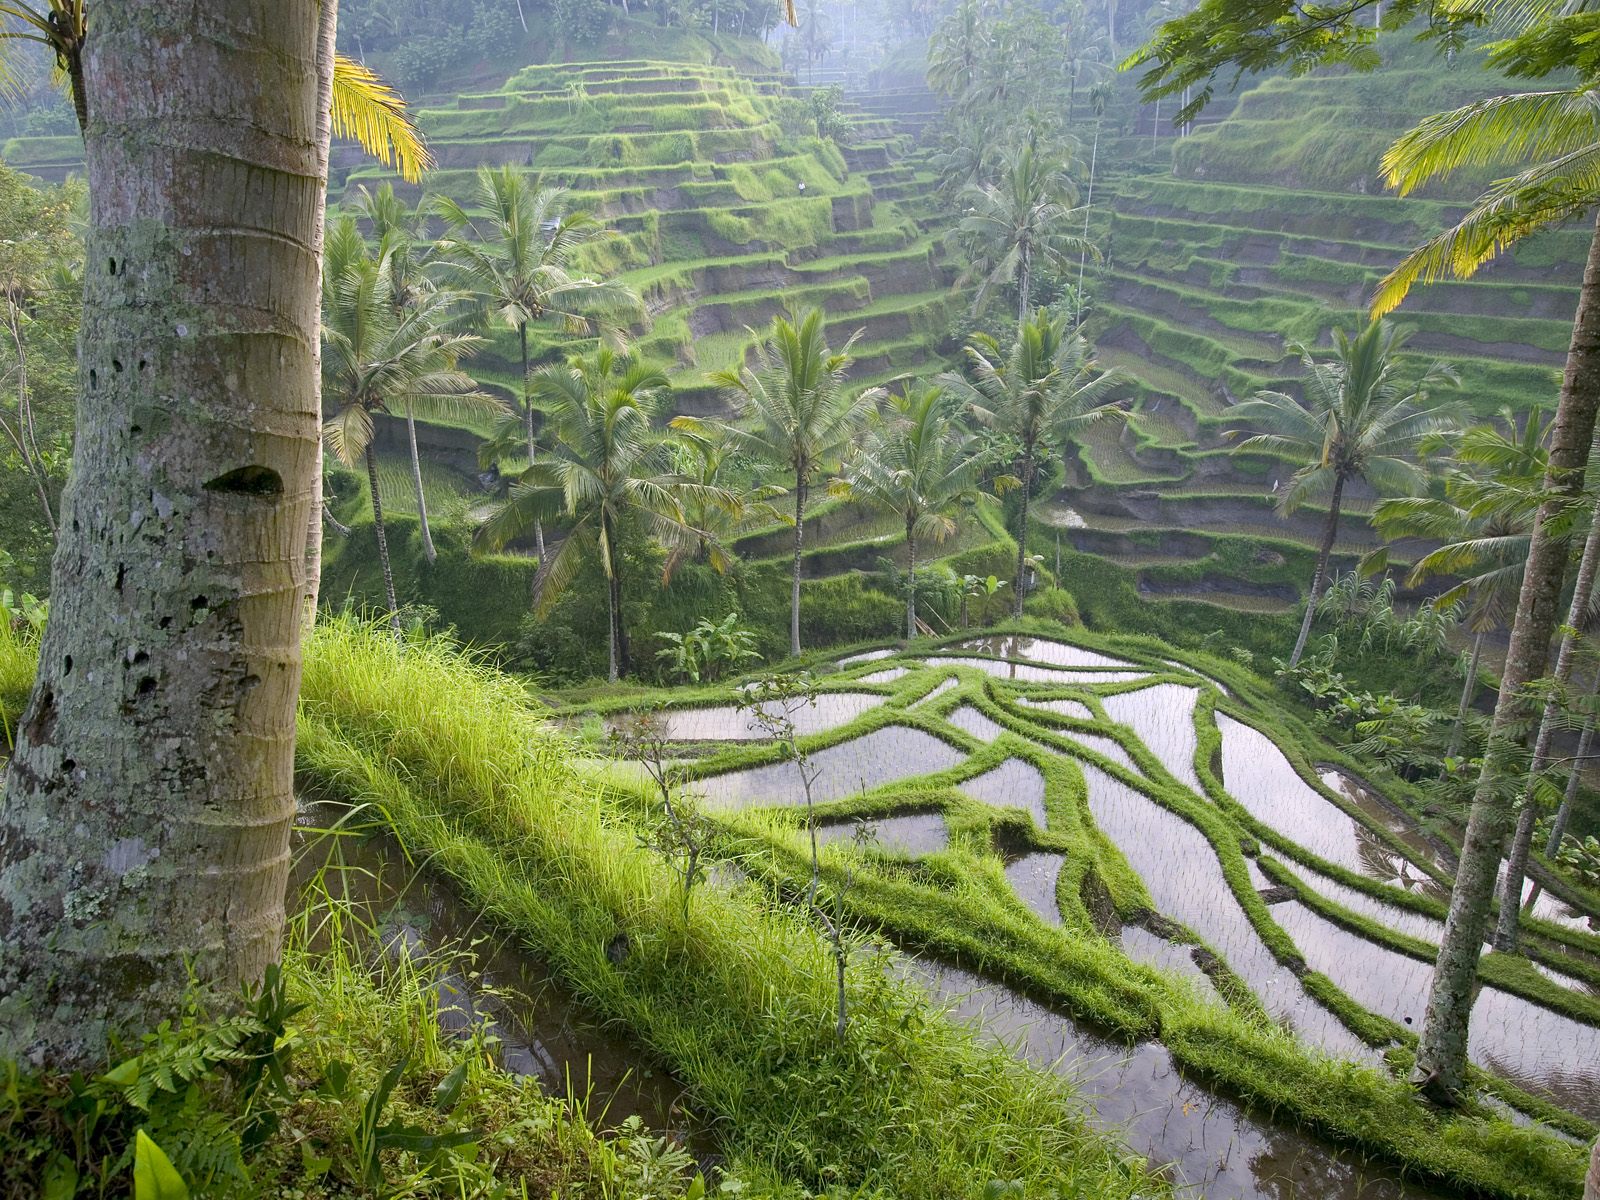 Download this Rice Paddies Ubud Area Bali Indonesia Wallpapers And Images picture